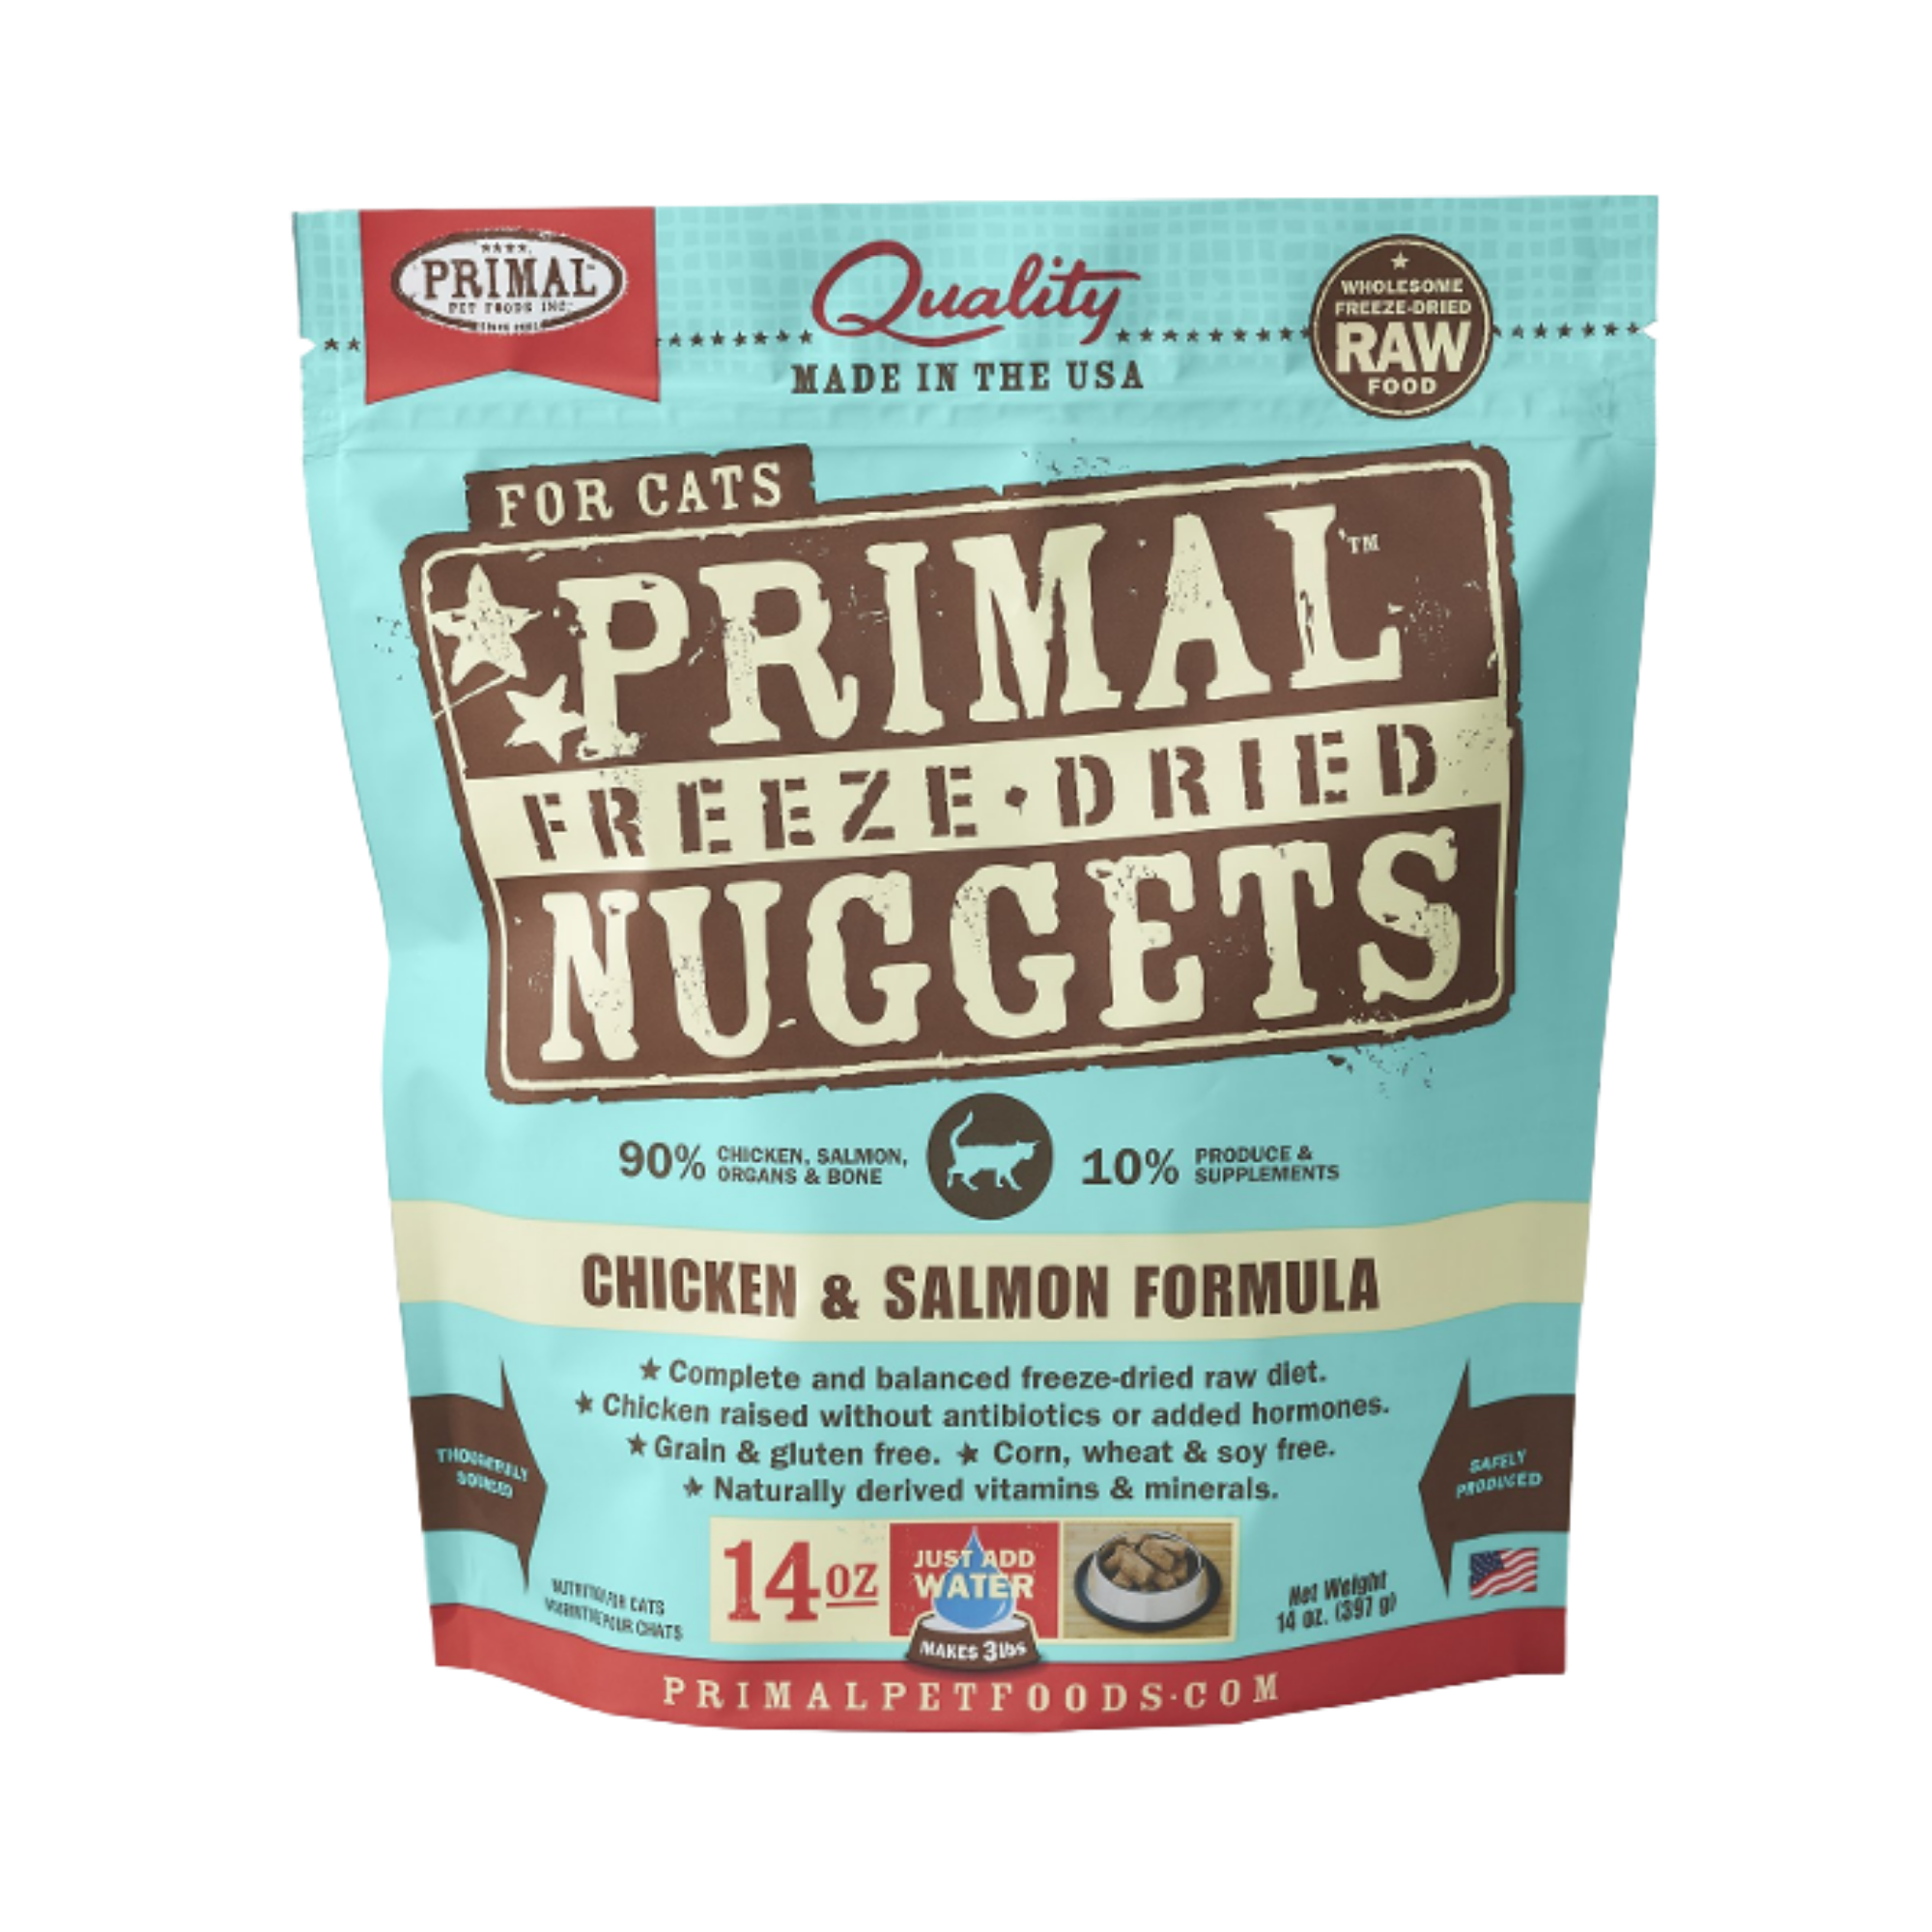 Primal Nuggets Chicken & Salmon Formula Freeze-Dried Cat Food - Mutts & Co.